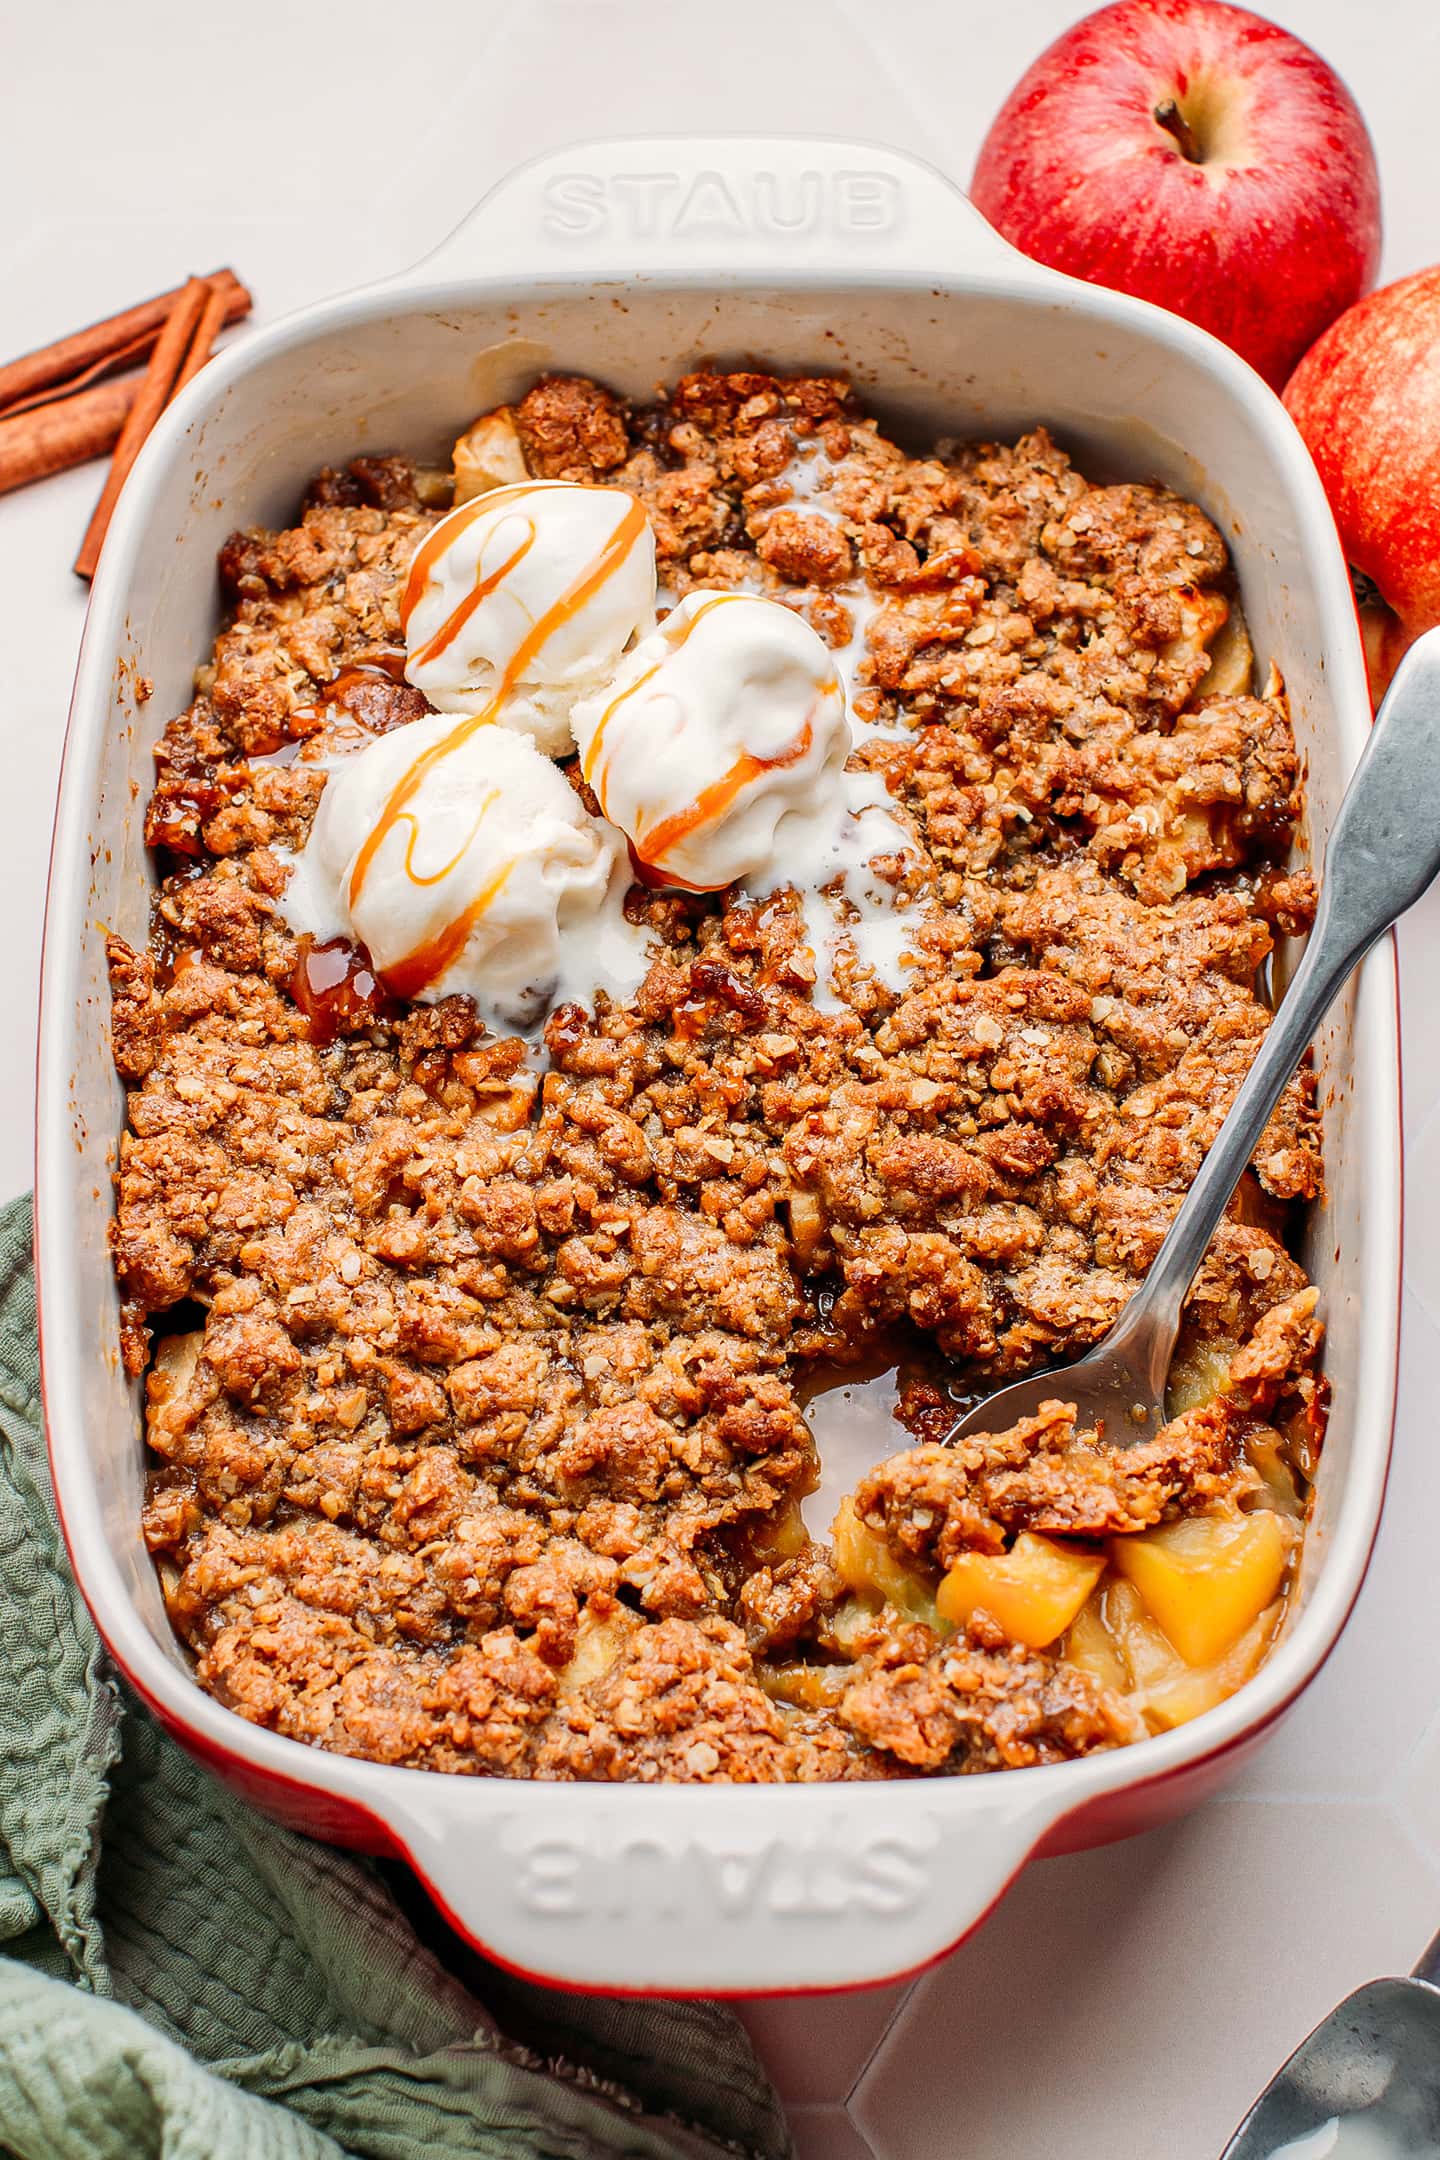 Apple crisp topped with vanilla ice cream and caramel.